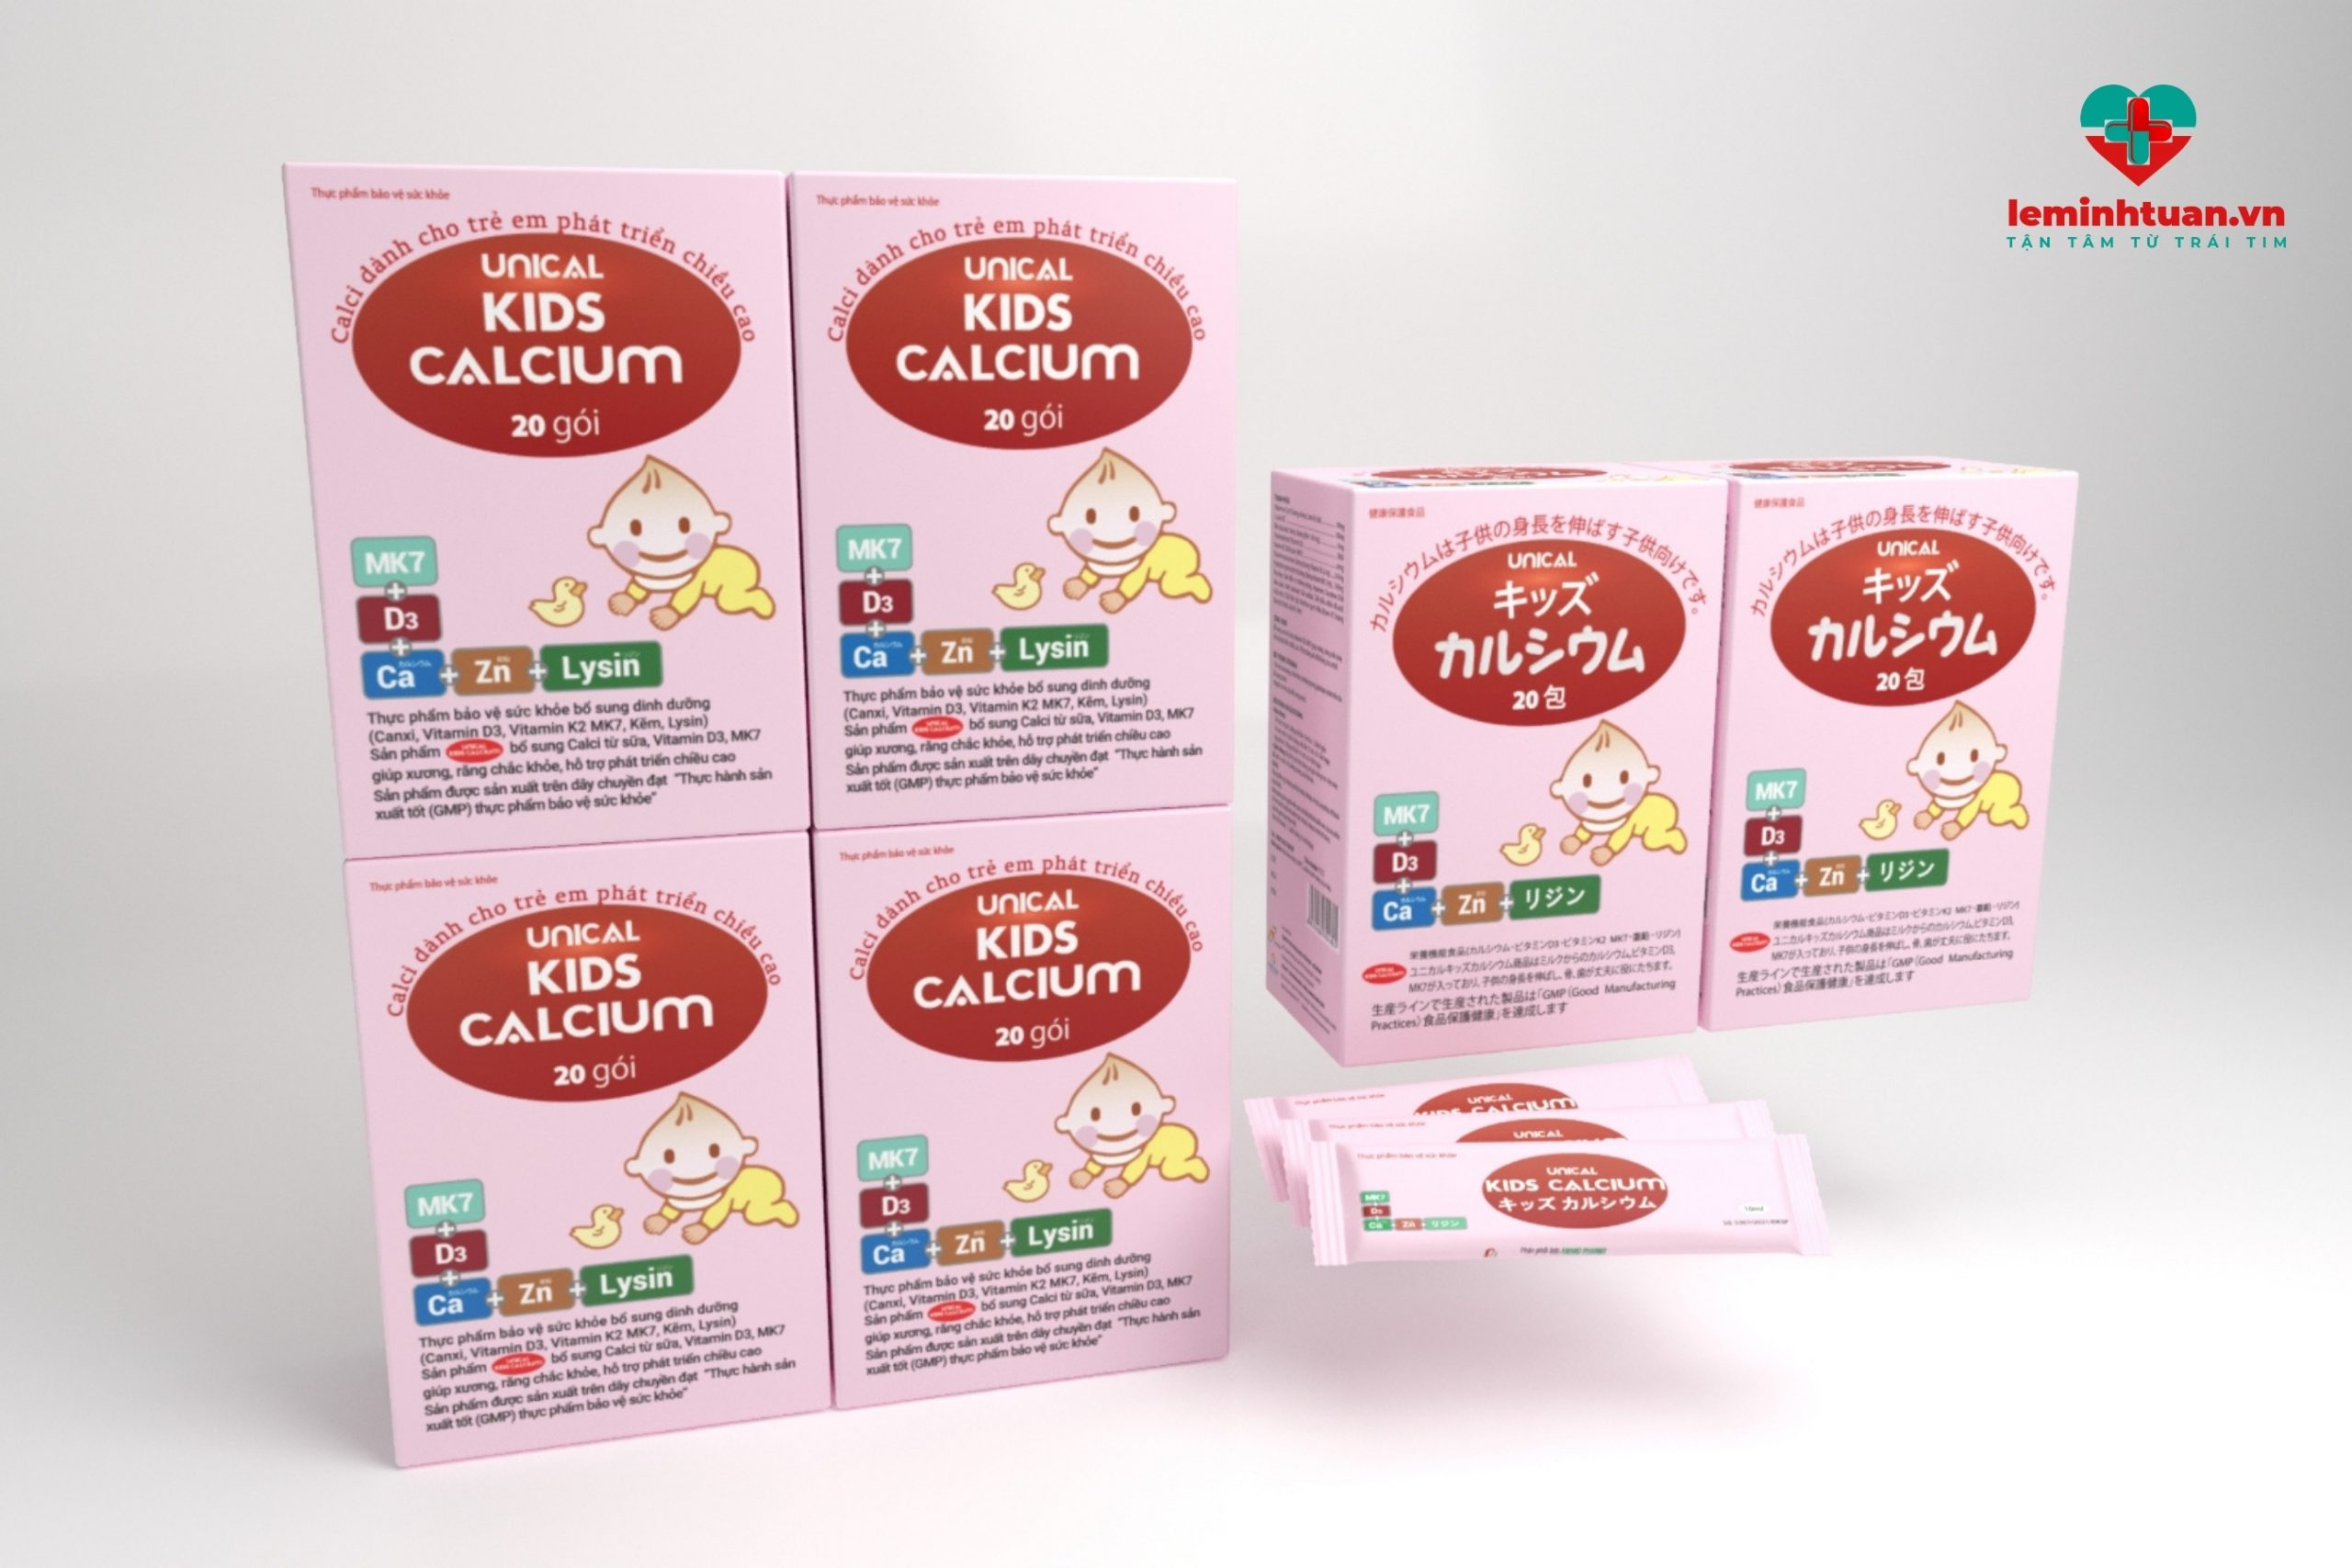 Unical Kids Calcium bổ sung canxi cho trẻ